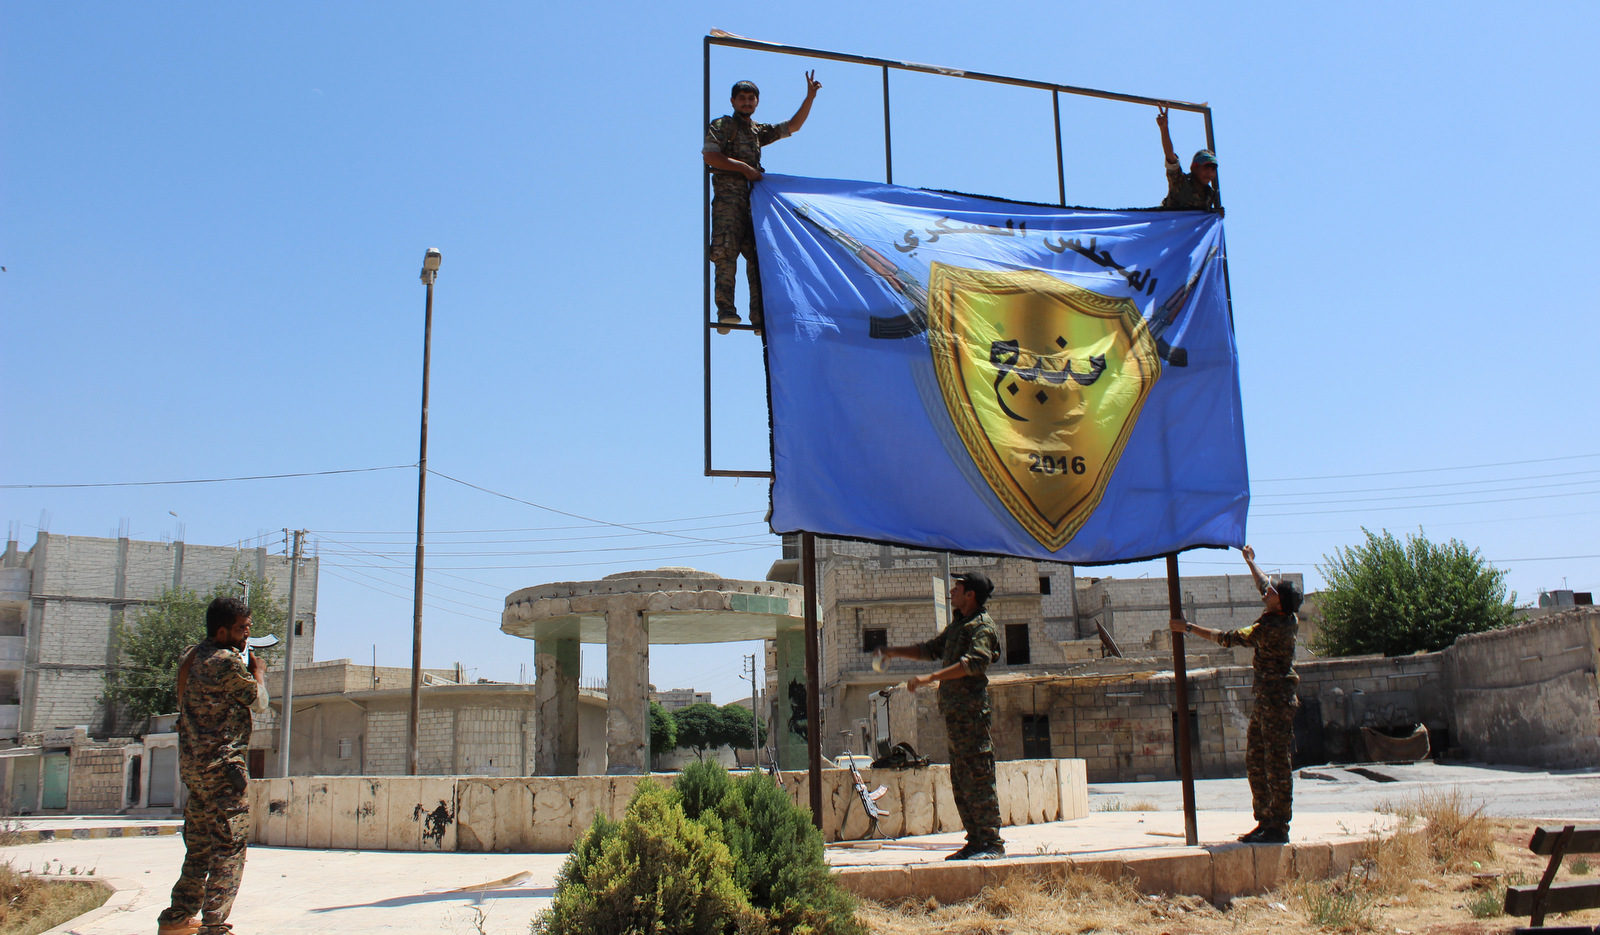 U.S.-backed, Kurdish-led Syria Democratic Forces raise their flag in the center of the town of Manbij after driving ISIS out of the area, in Aleppo province, Syria